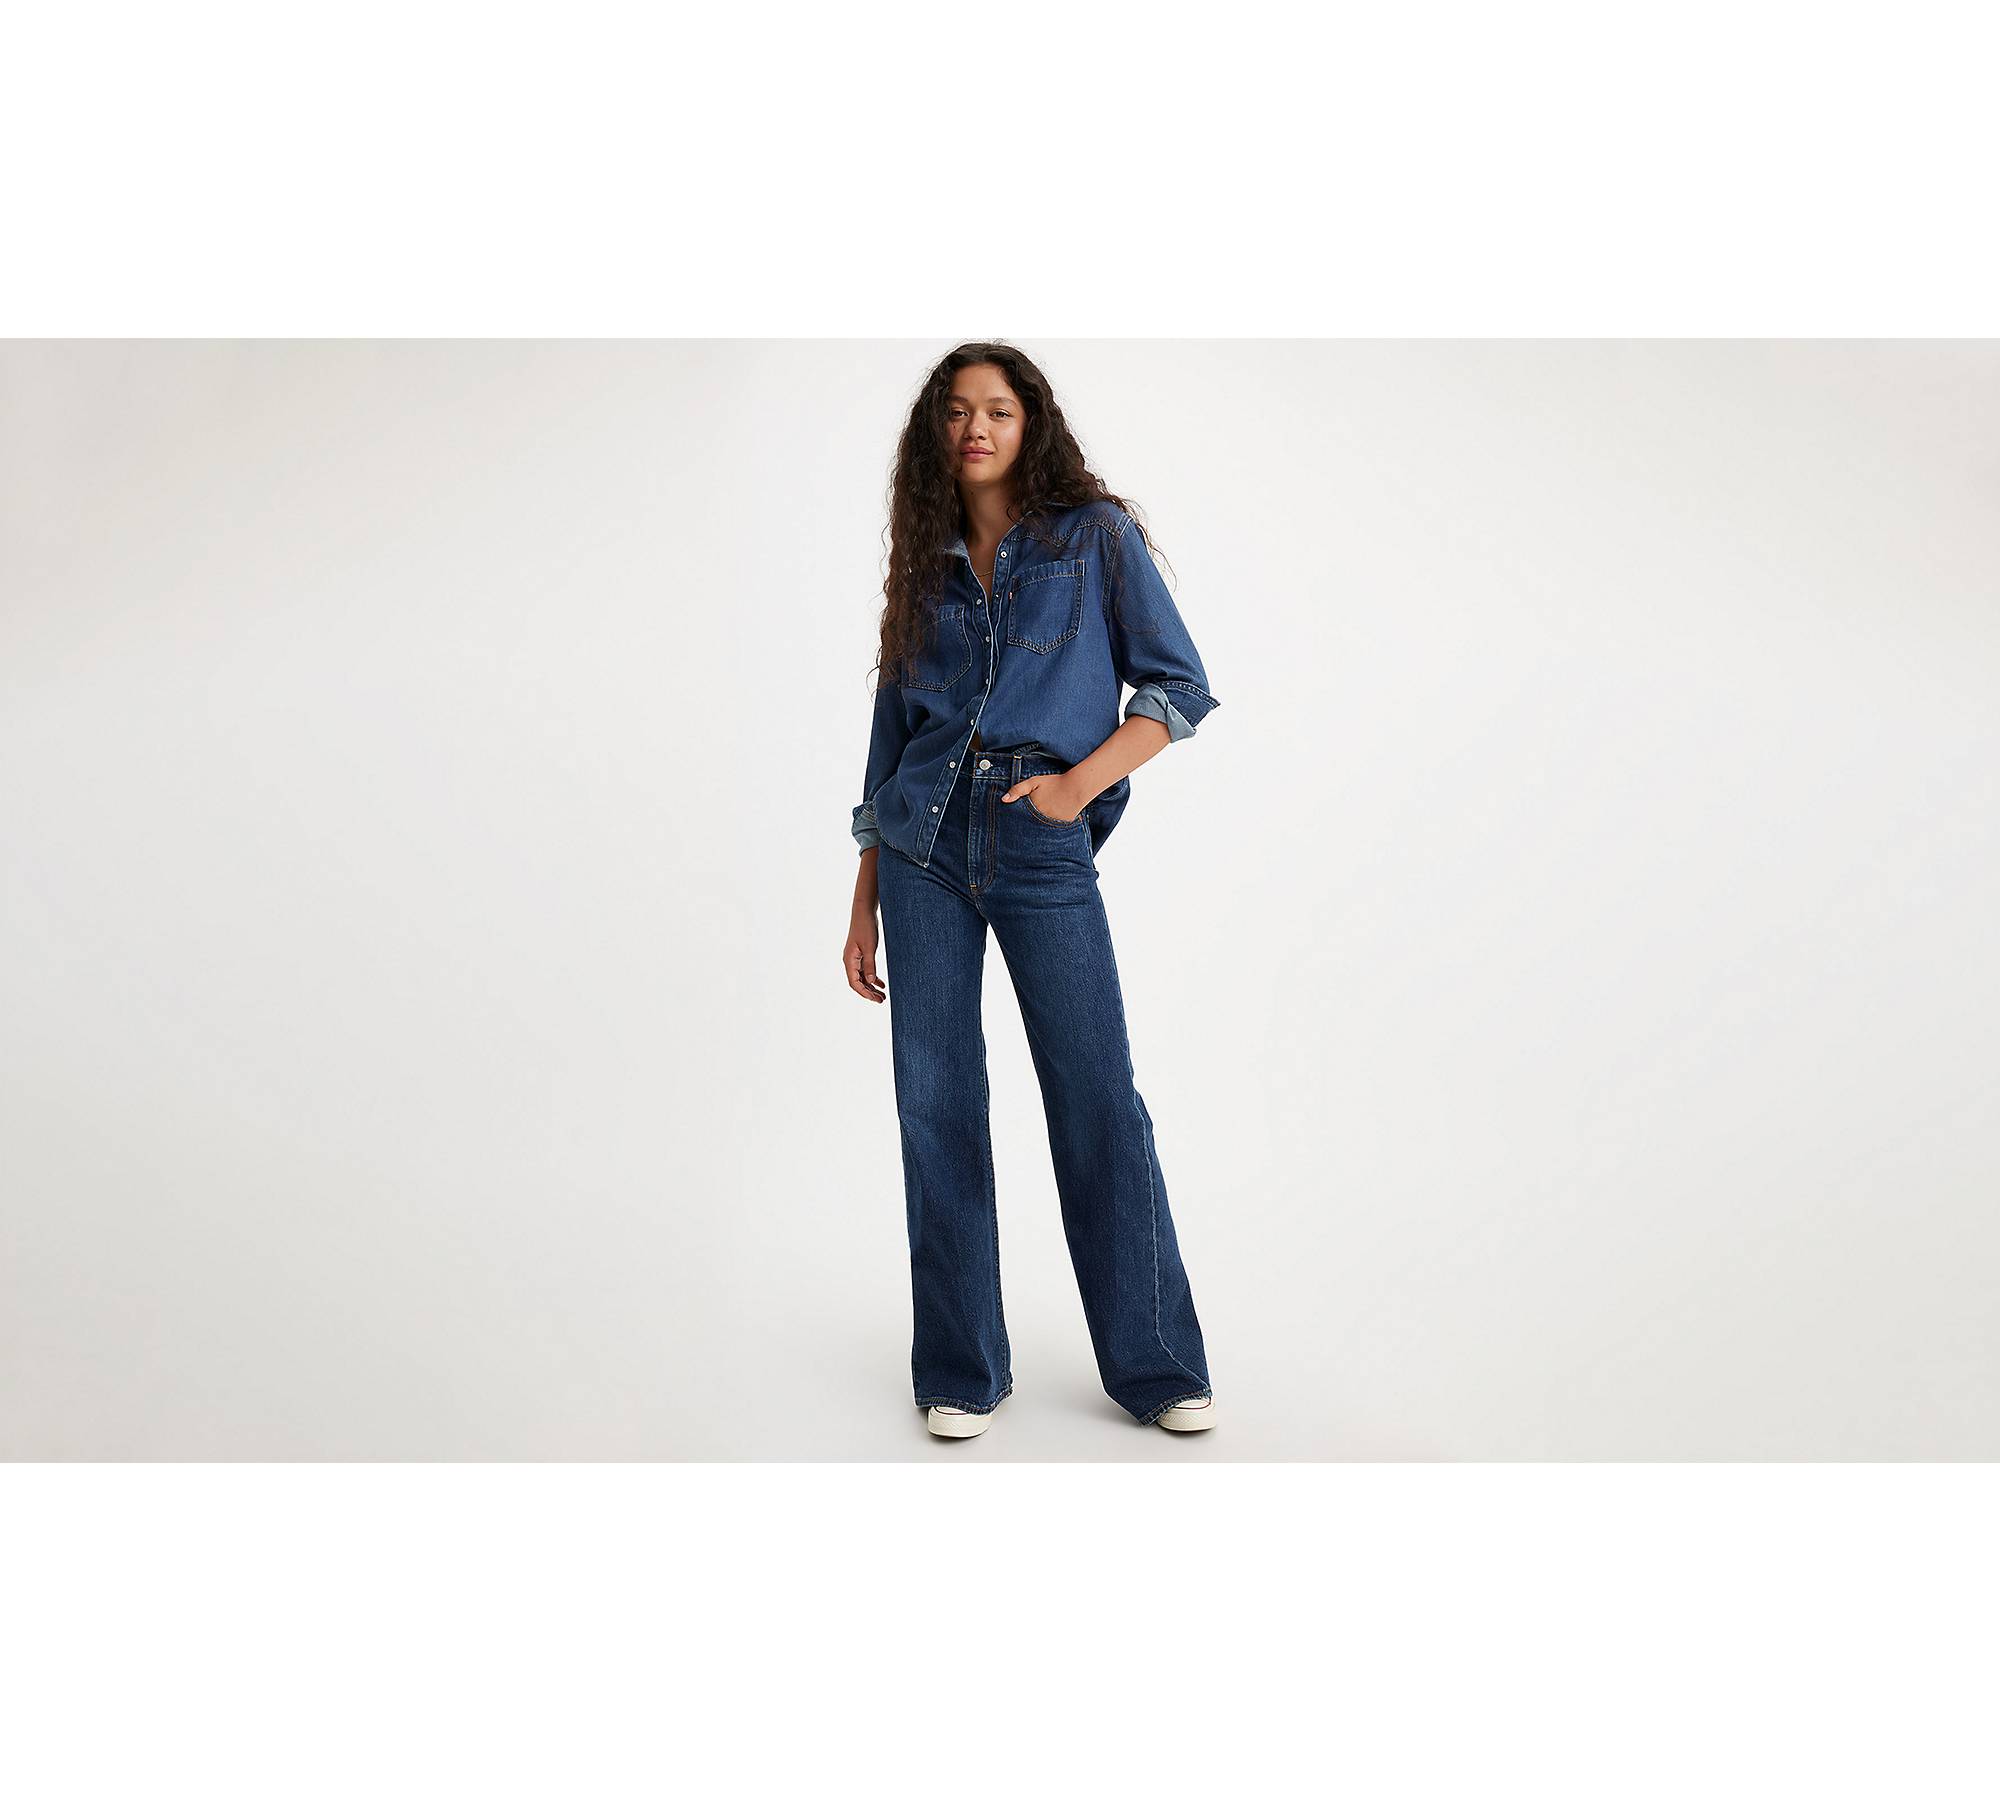 Levi's Ribcage flare jeans in blue